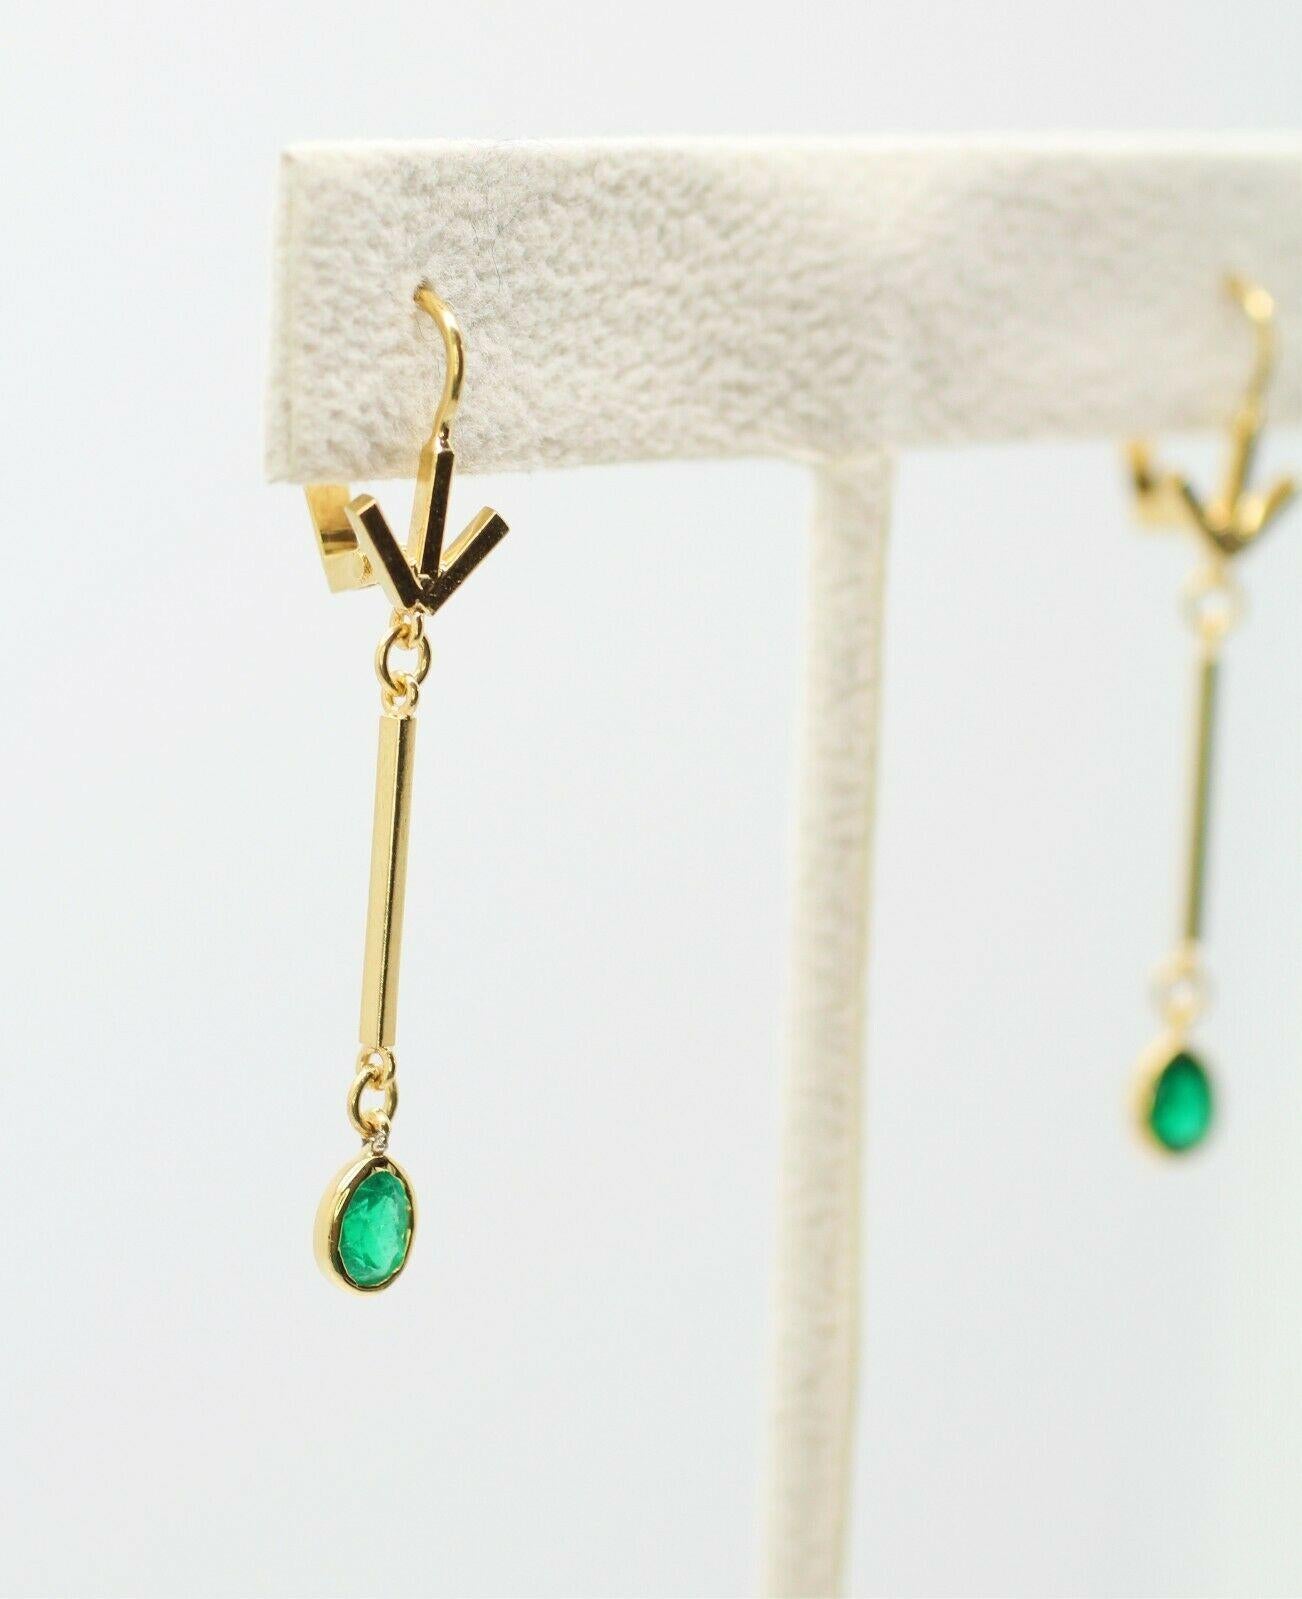  14k yellow gold emerald drop earrings containing
Specifications:
    main stone: OVAL EMERALD CUT
    diamonds: 2 PCS
    carat total weight:  0.80 CTW
    brand: custom
    metal: 14k YELLOW GOLD
    type: DROP EARRINGS
    weight: 2.8 GR 